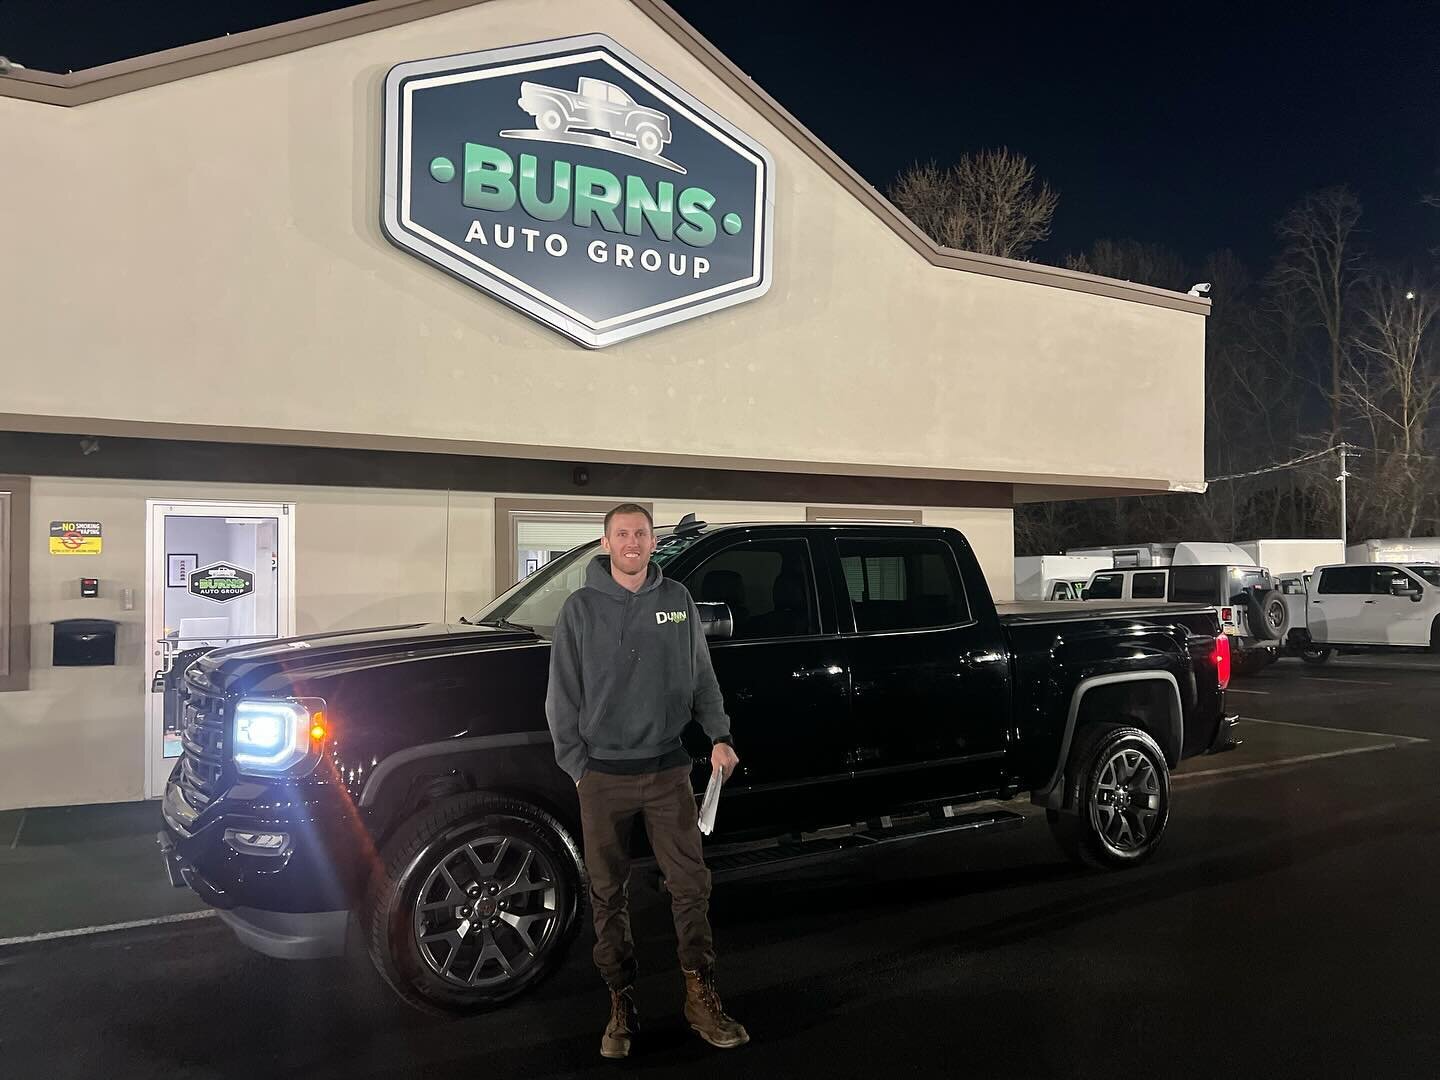 Buzzer beater to end the month! Congrats to Dalton on his 2016 GMC Sierra 1500 SLE All Terrain! We appreciate you traveling over from NJ, enjoy the truck 🛻